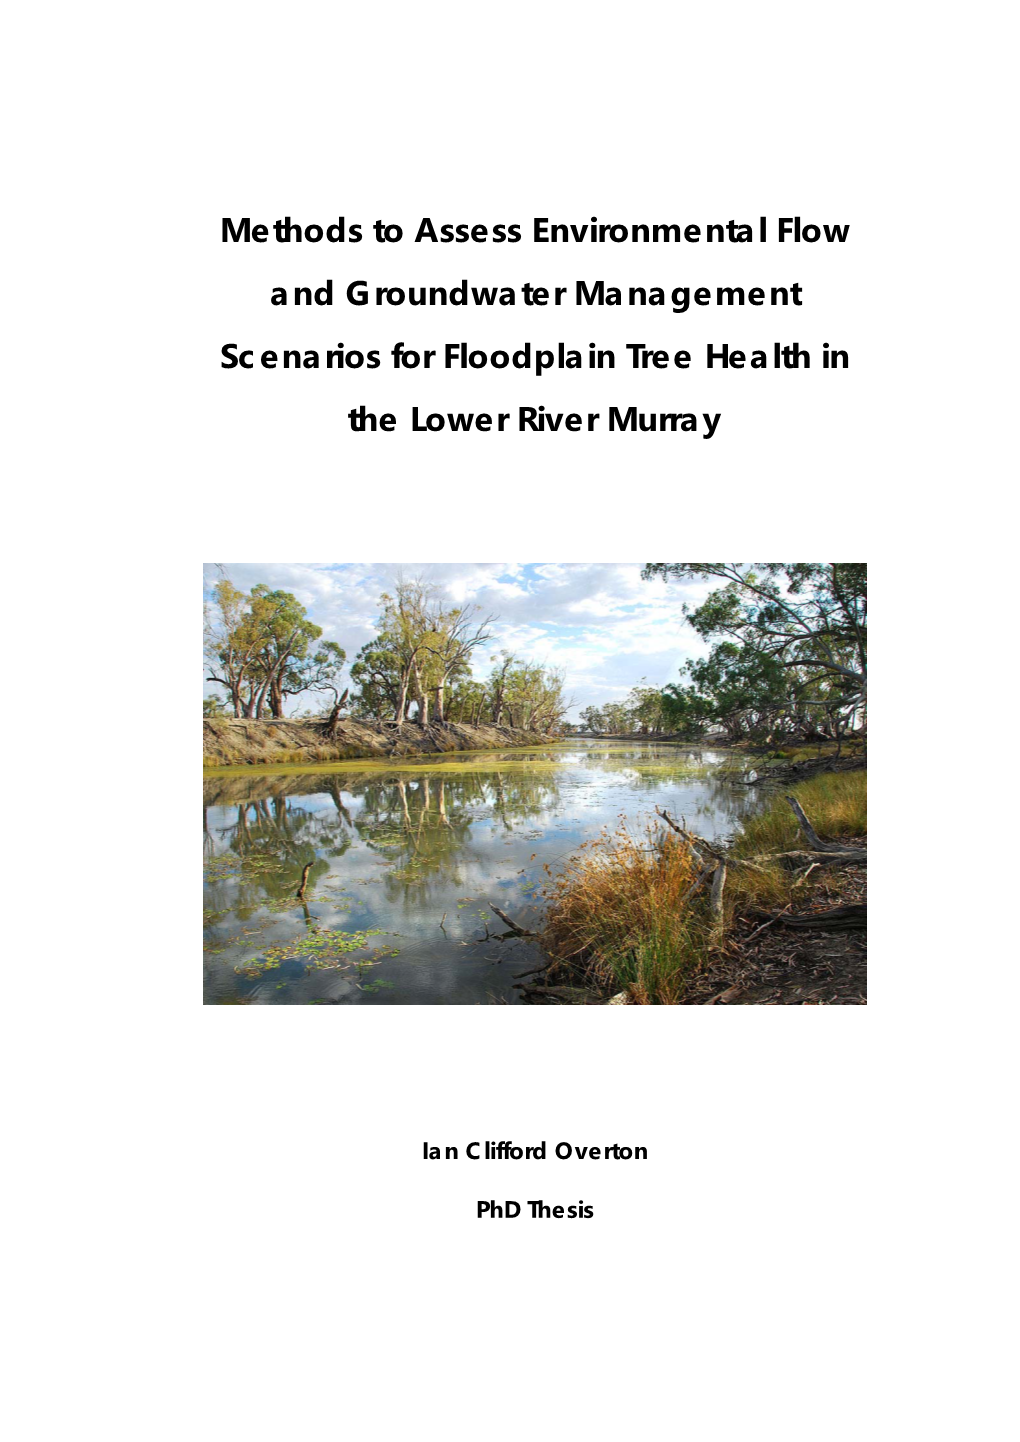 Methods to Assess Environmental Flow and Groundwater Management Scenarios for Floodplain Tree Health in the Lower River Murray